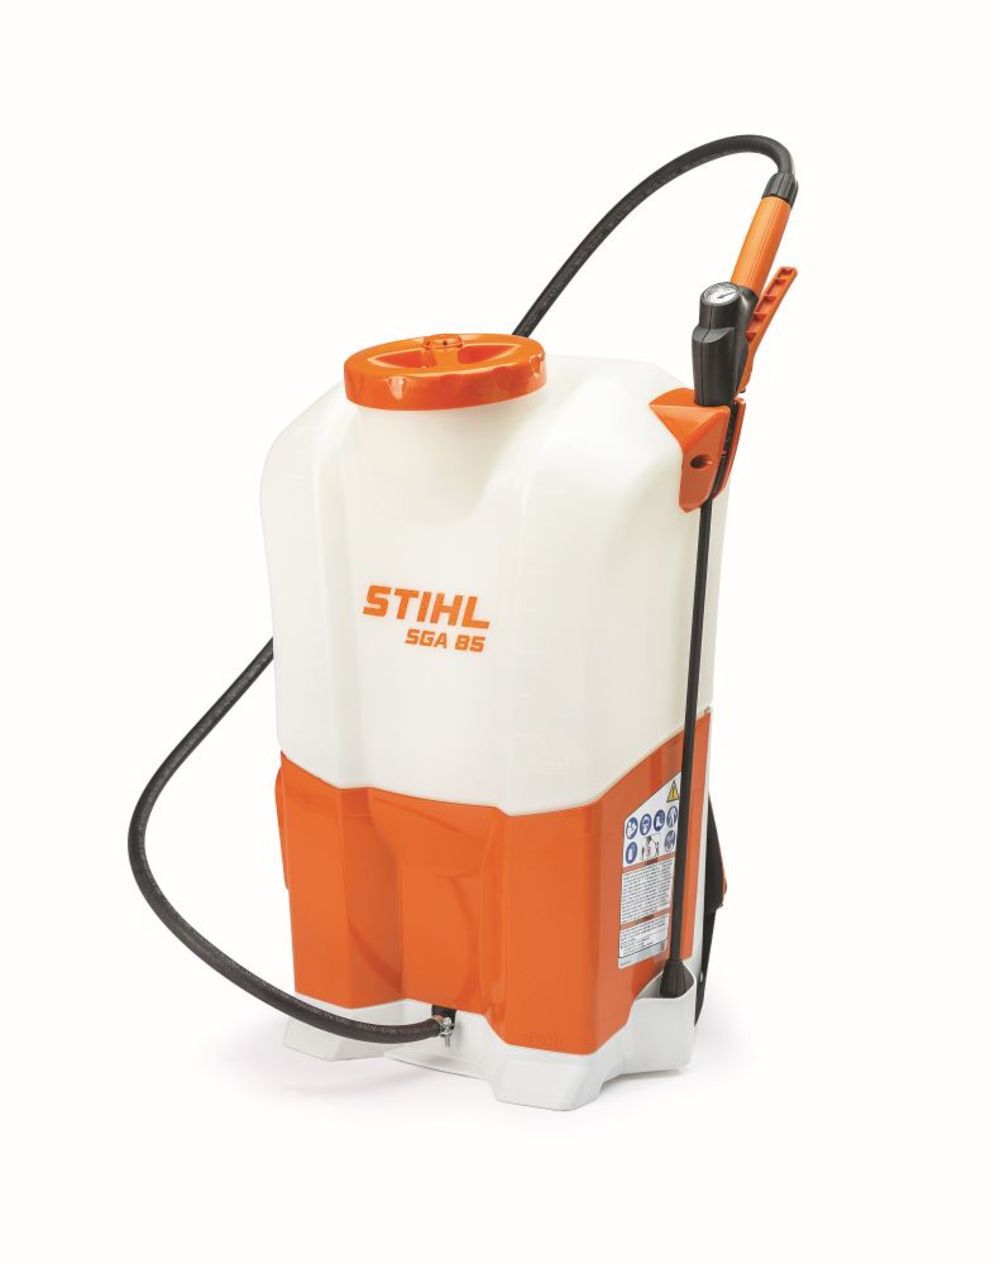 Disorder Prophecy Bloom Stihl SGA 85 4.5 Gallon 87 Psi Battery Powered Backpack Sprayer (Bare Tool)  4854 011 7001 US from Stihl - Acme Tools